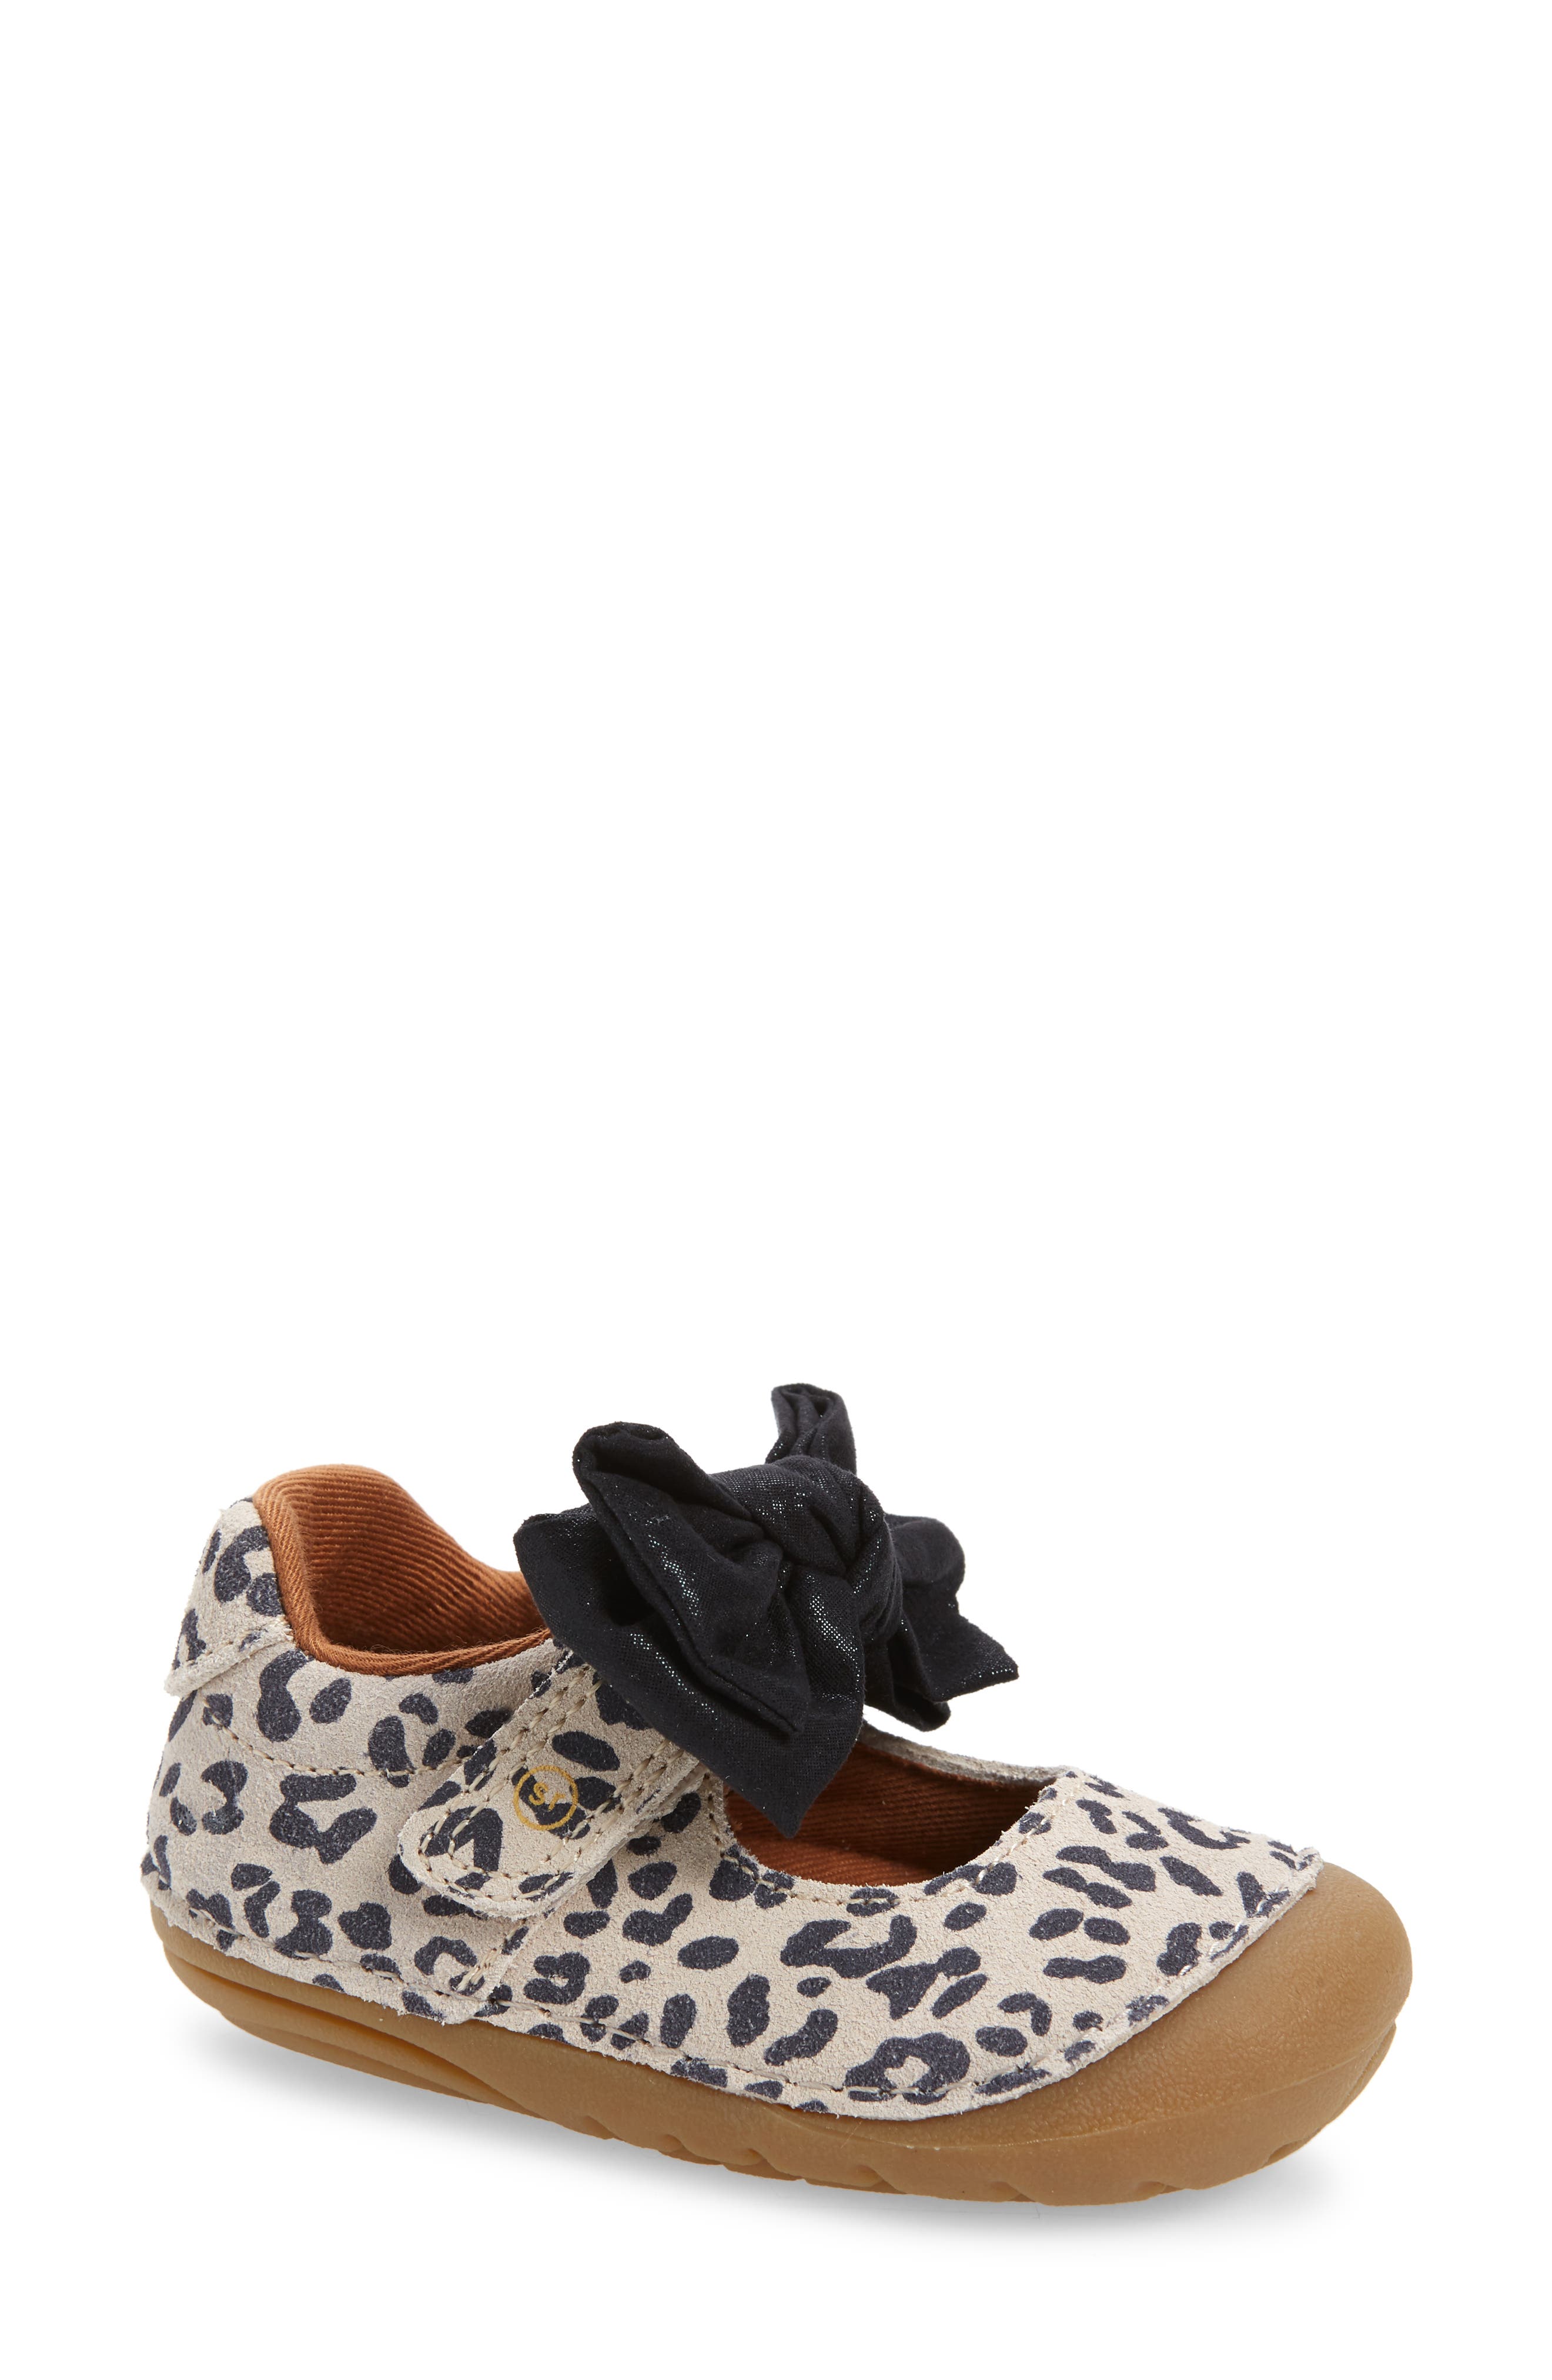 nordstrom shoes for toddlers